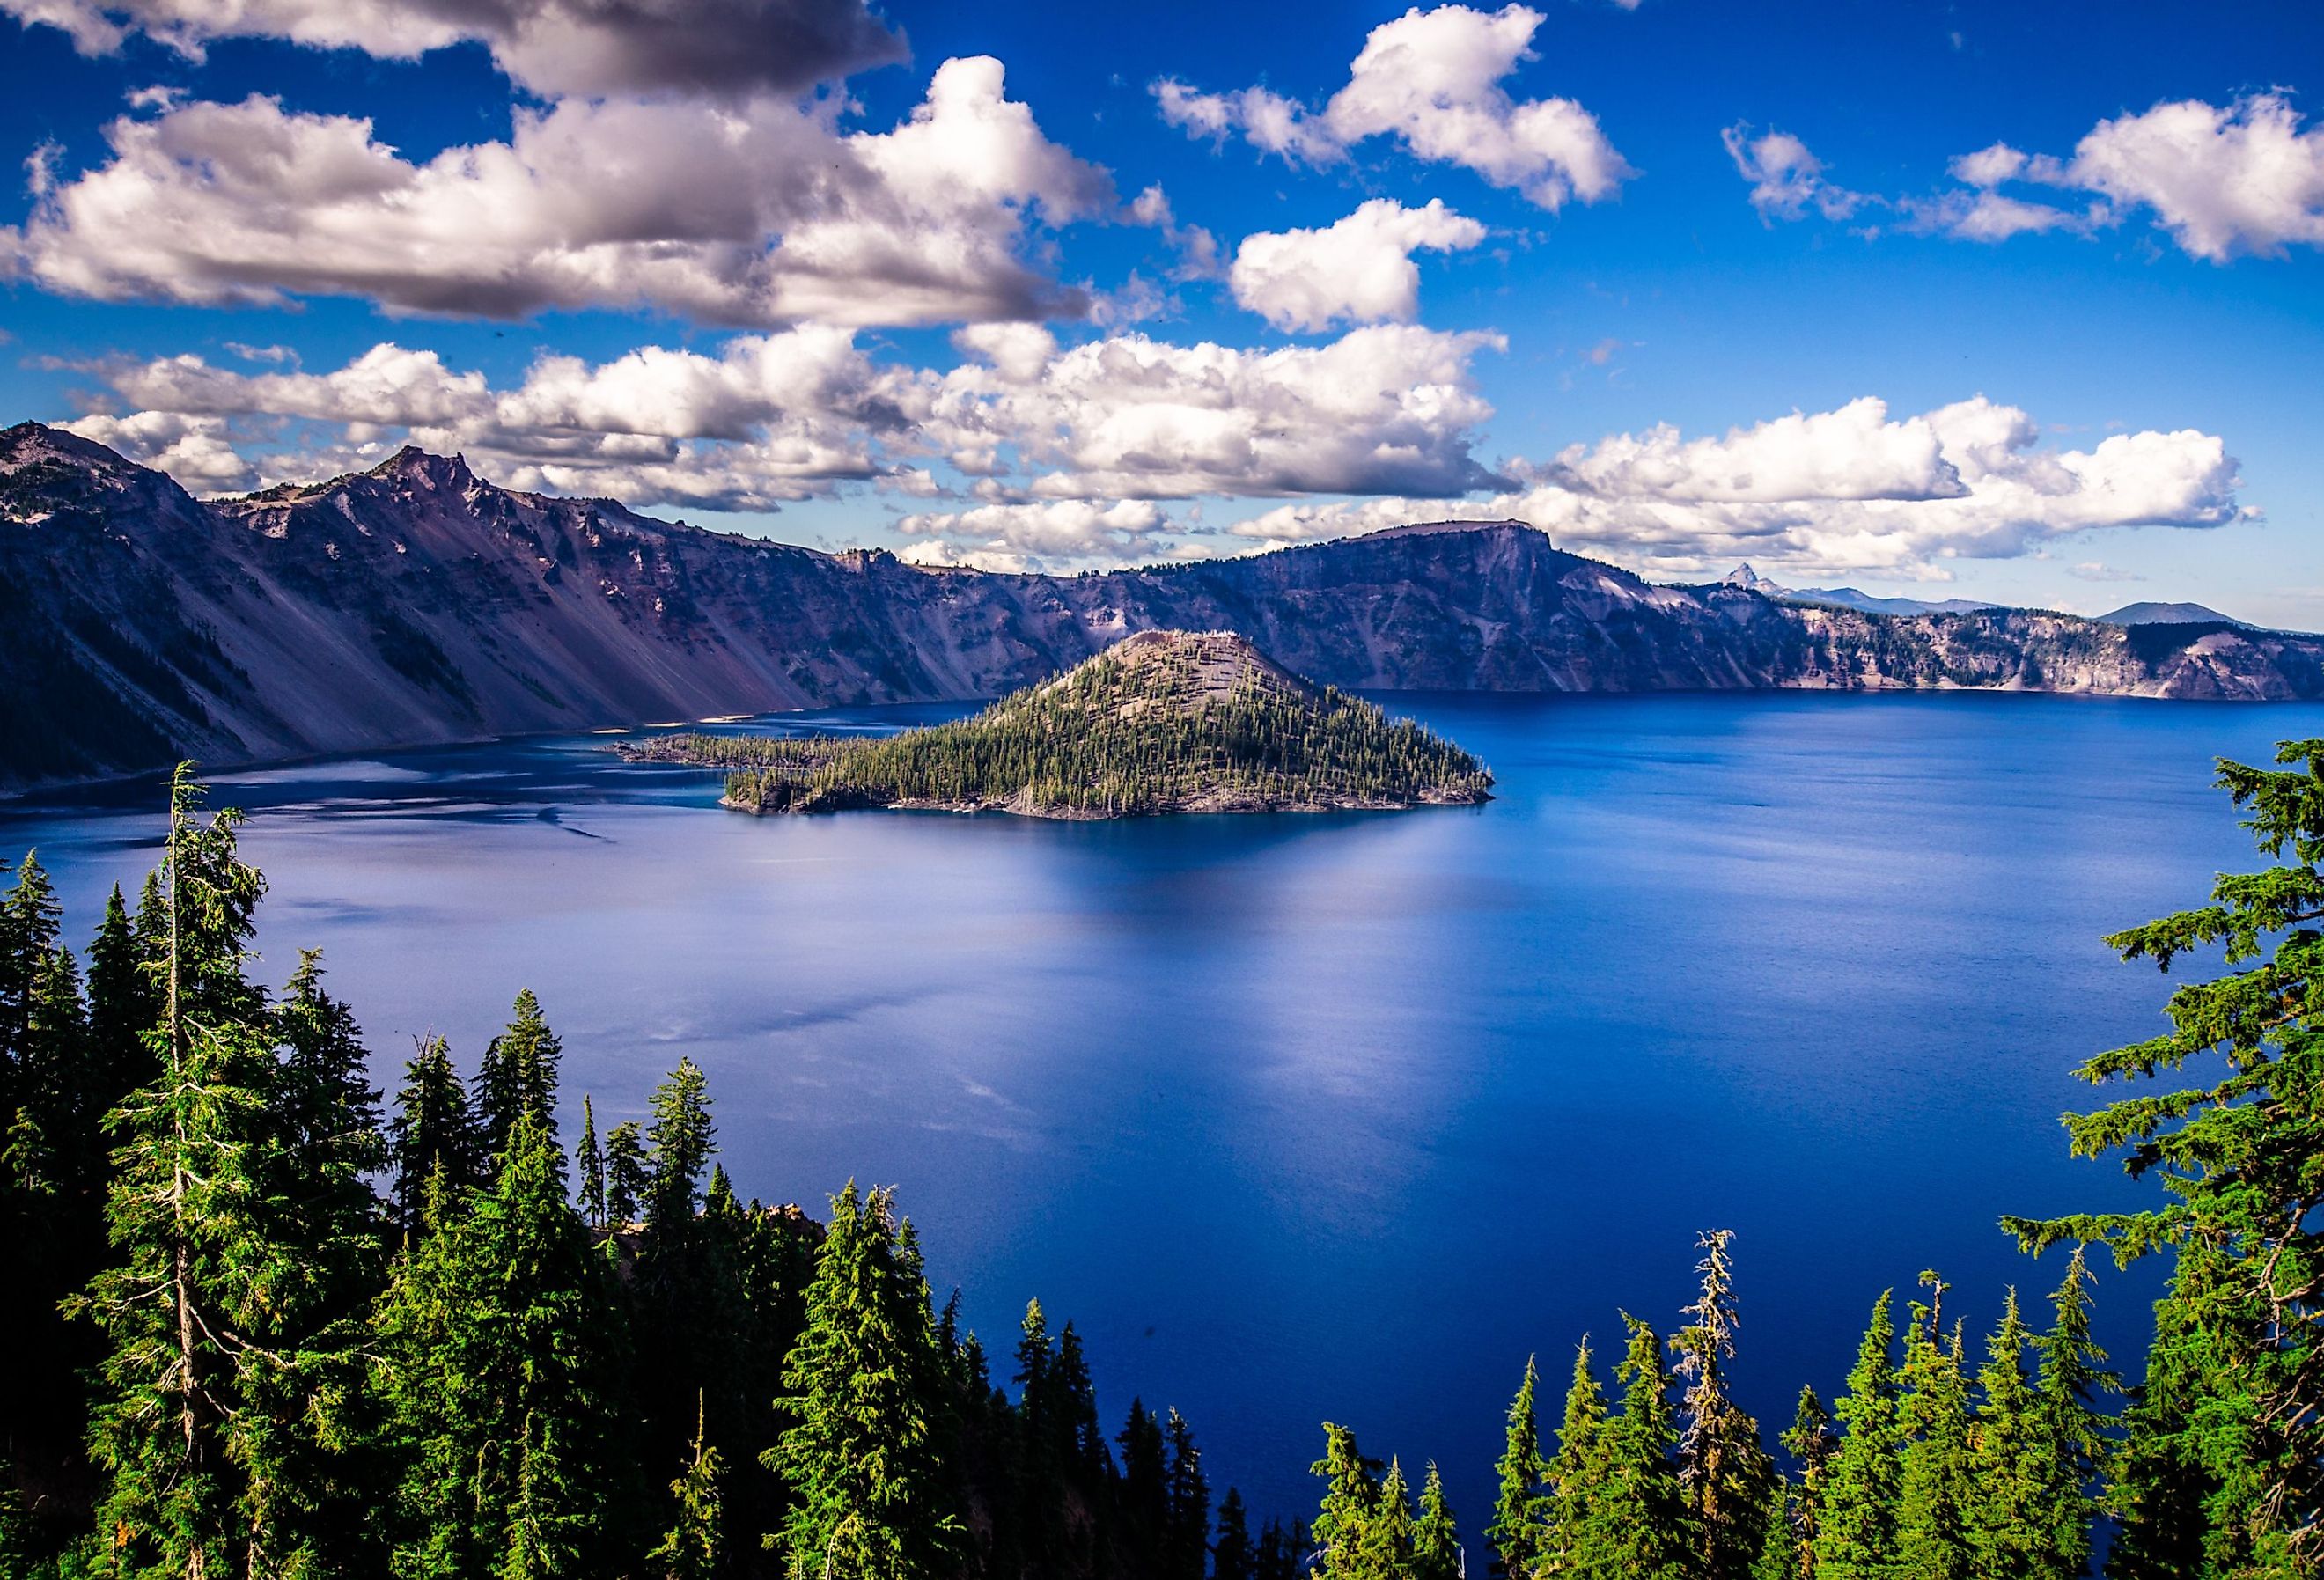 The Best Budget-Friendly National Park To Visit In The Northwest